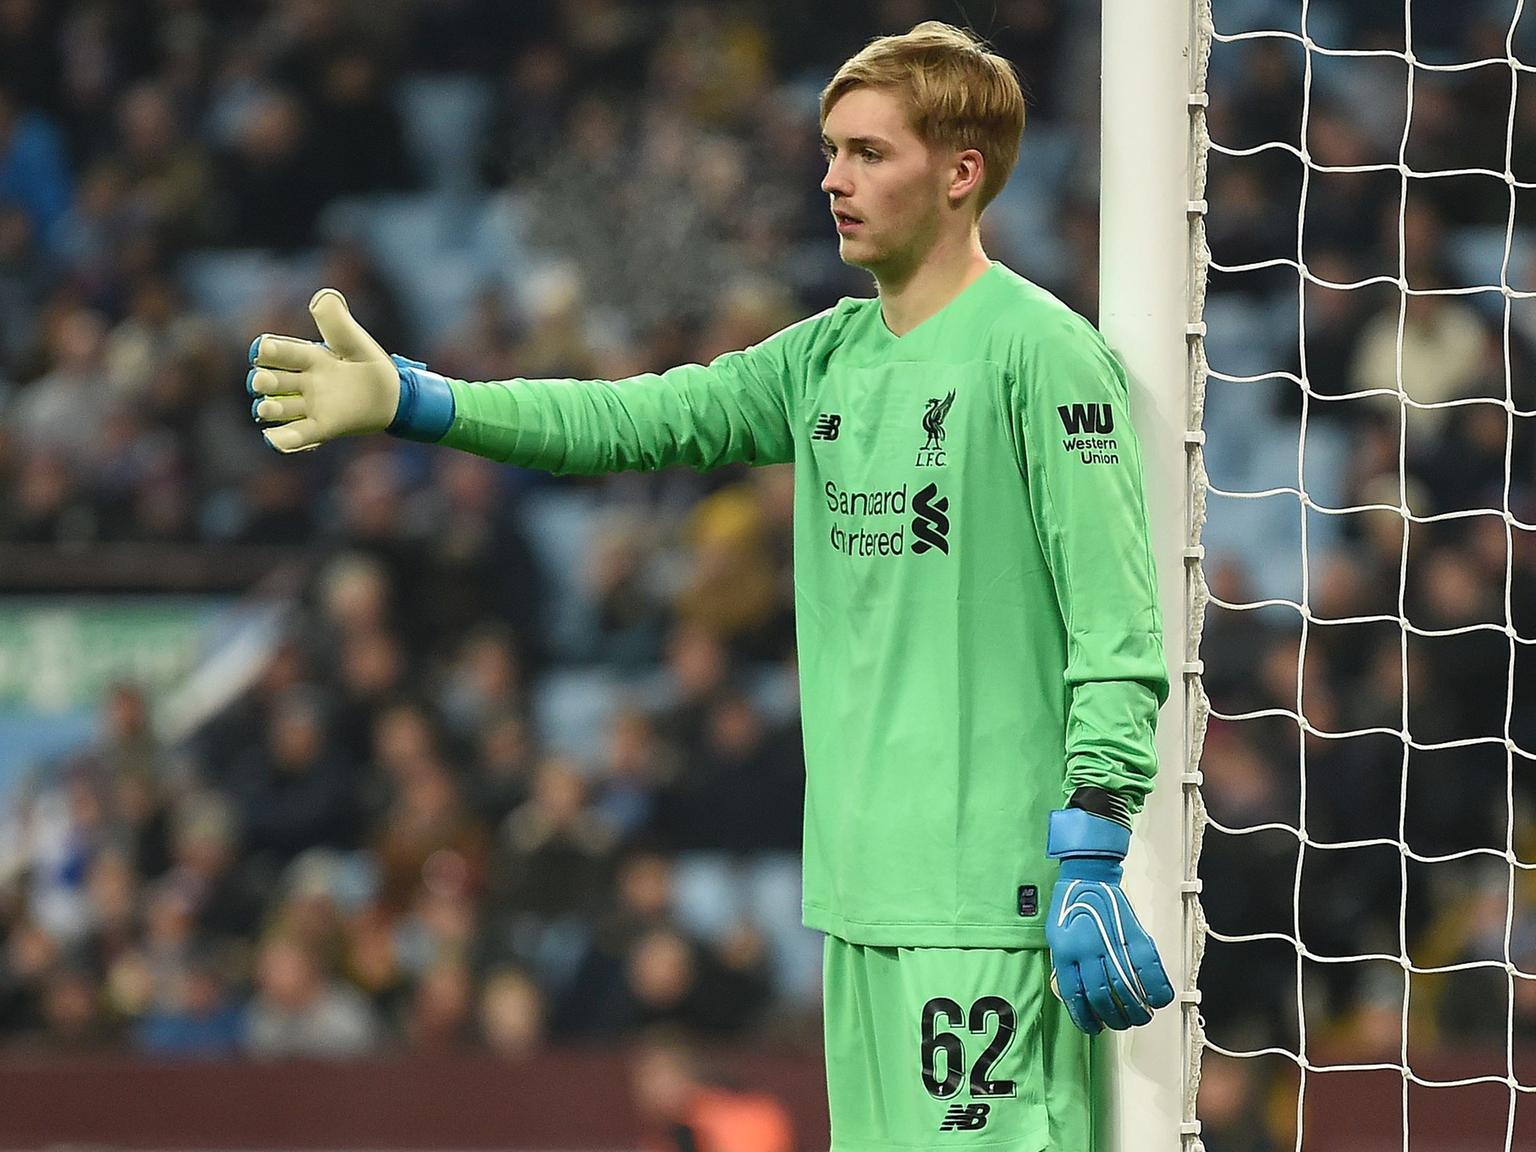 The 21-year-old shot-stopper is unlikely to unseat Allison and could see himself fourth choice behind Adrian and Andy Lonergan next season. A loan move could be best for all parties.